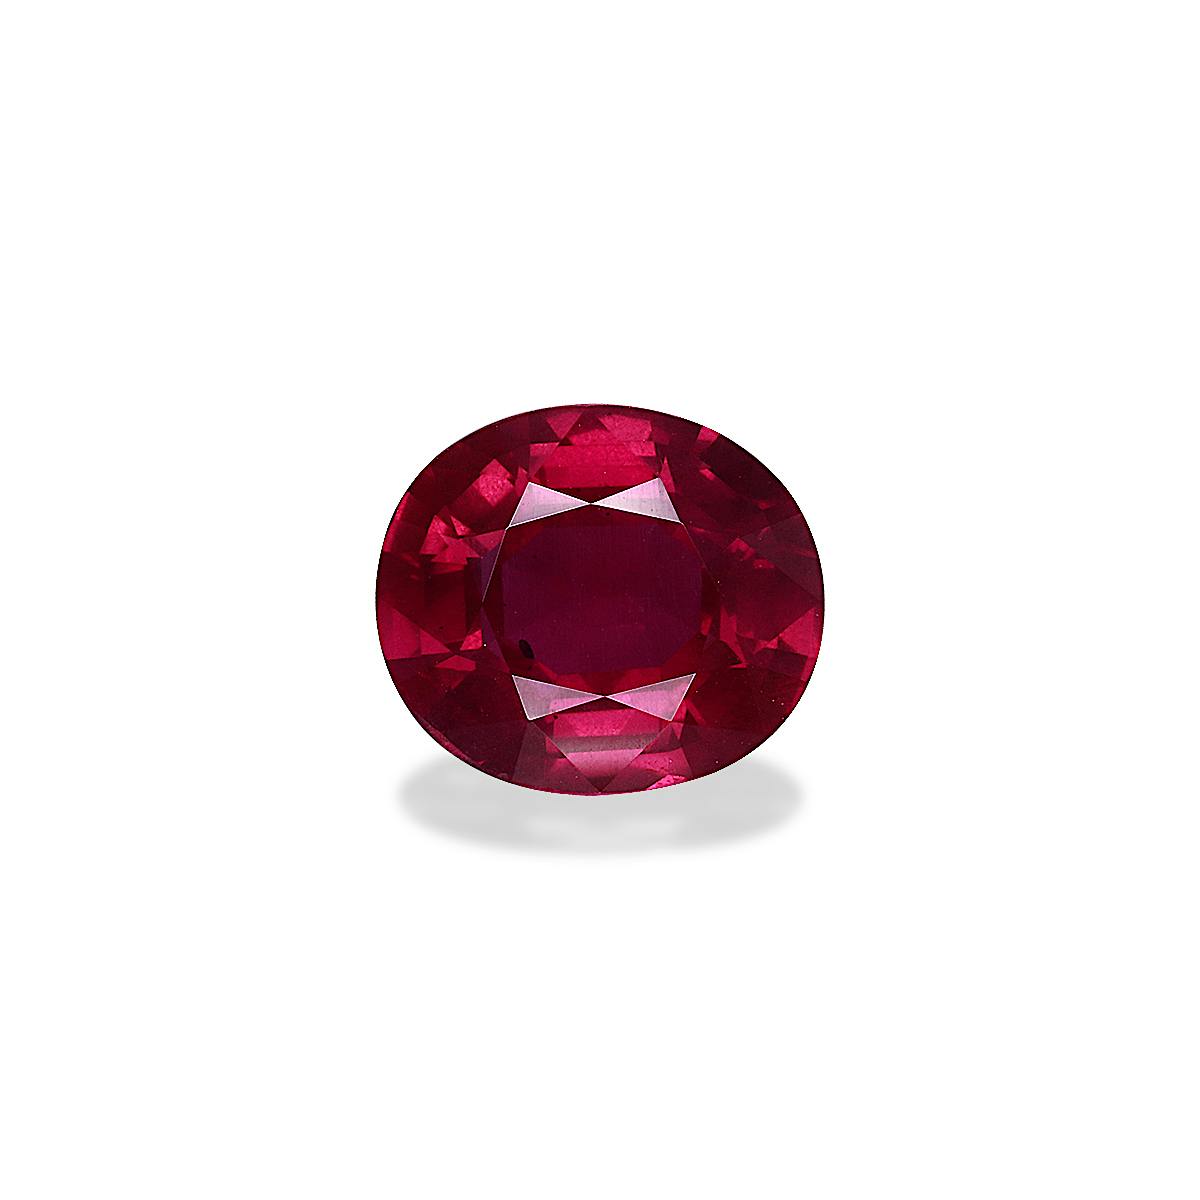 Pigeons Blood Mozambique Ruby 3.07ct - Main Image